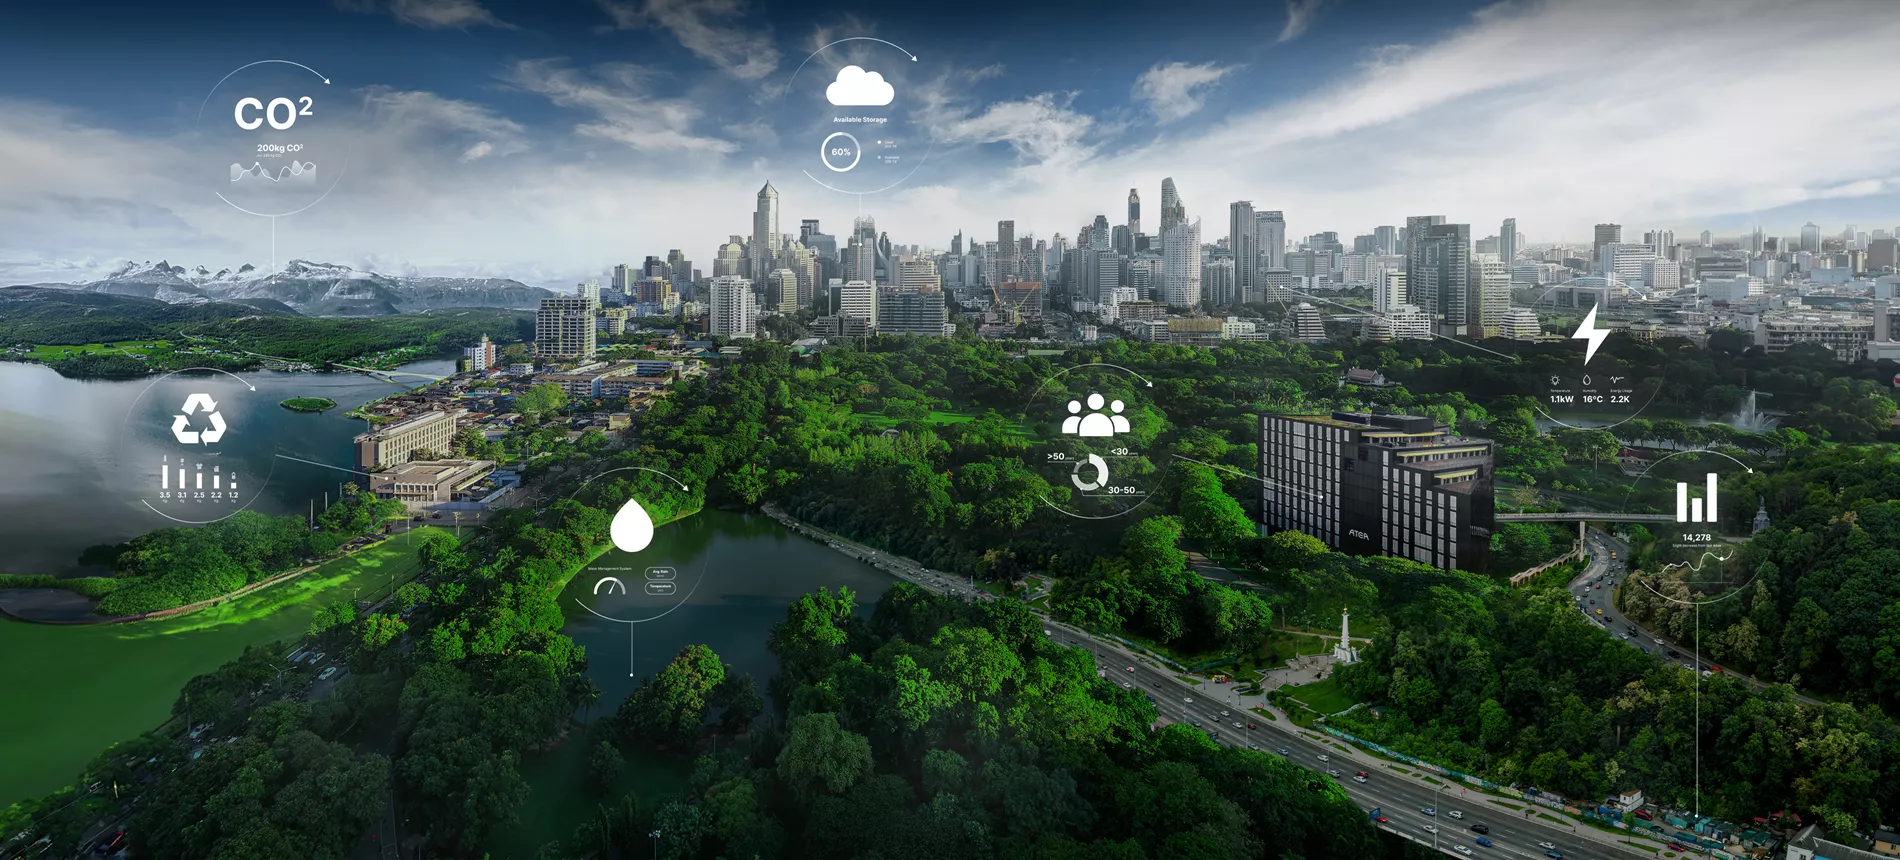 Cityscape And Park With Graphics Of ESG Topics